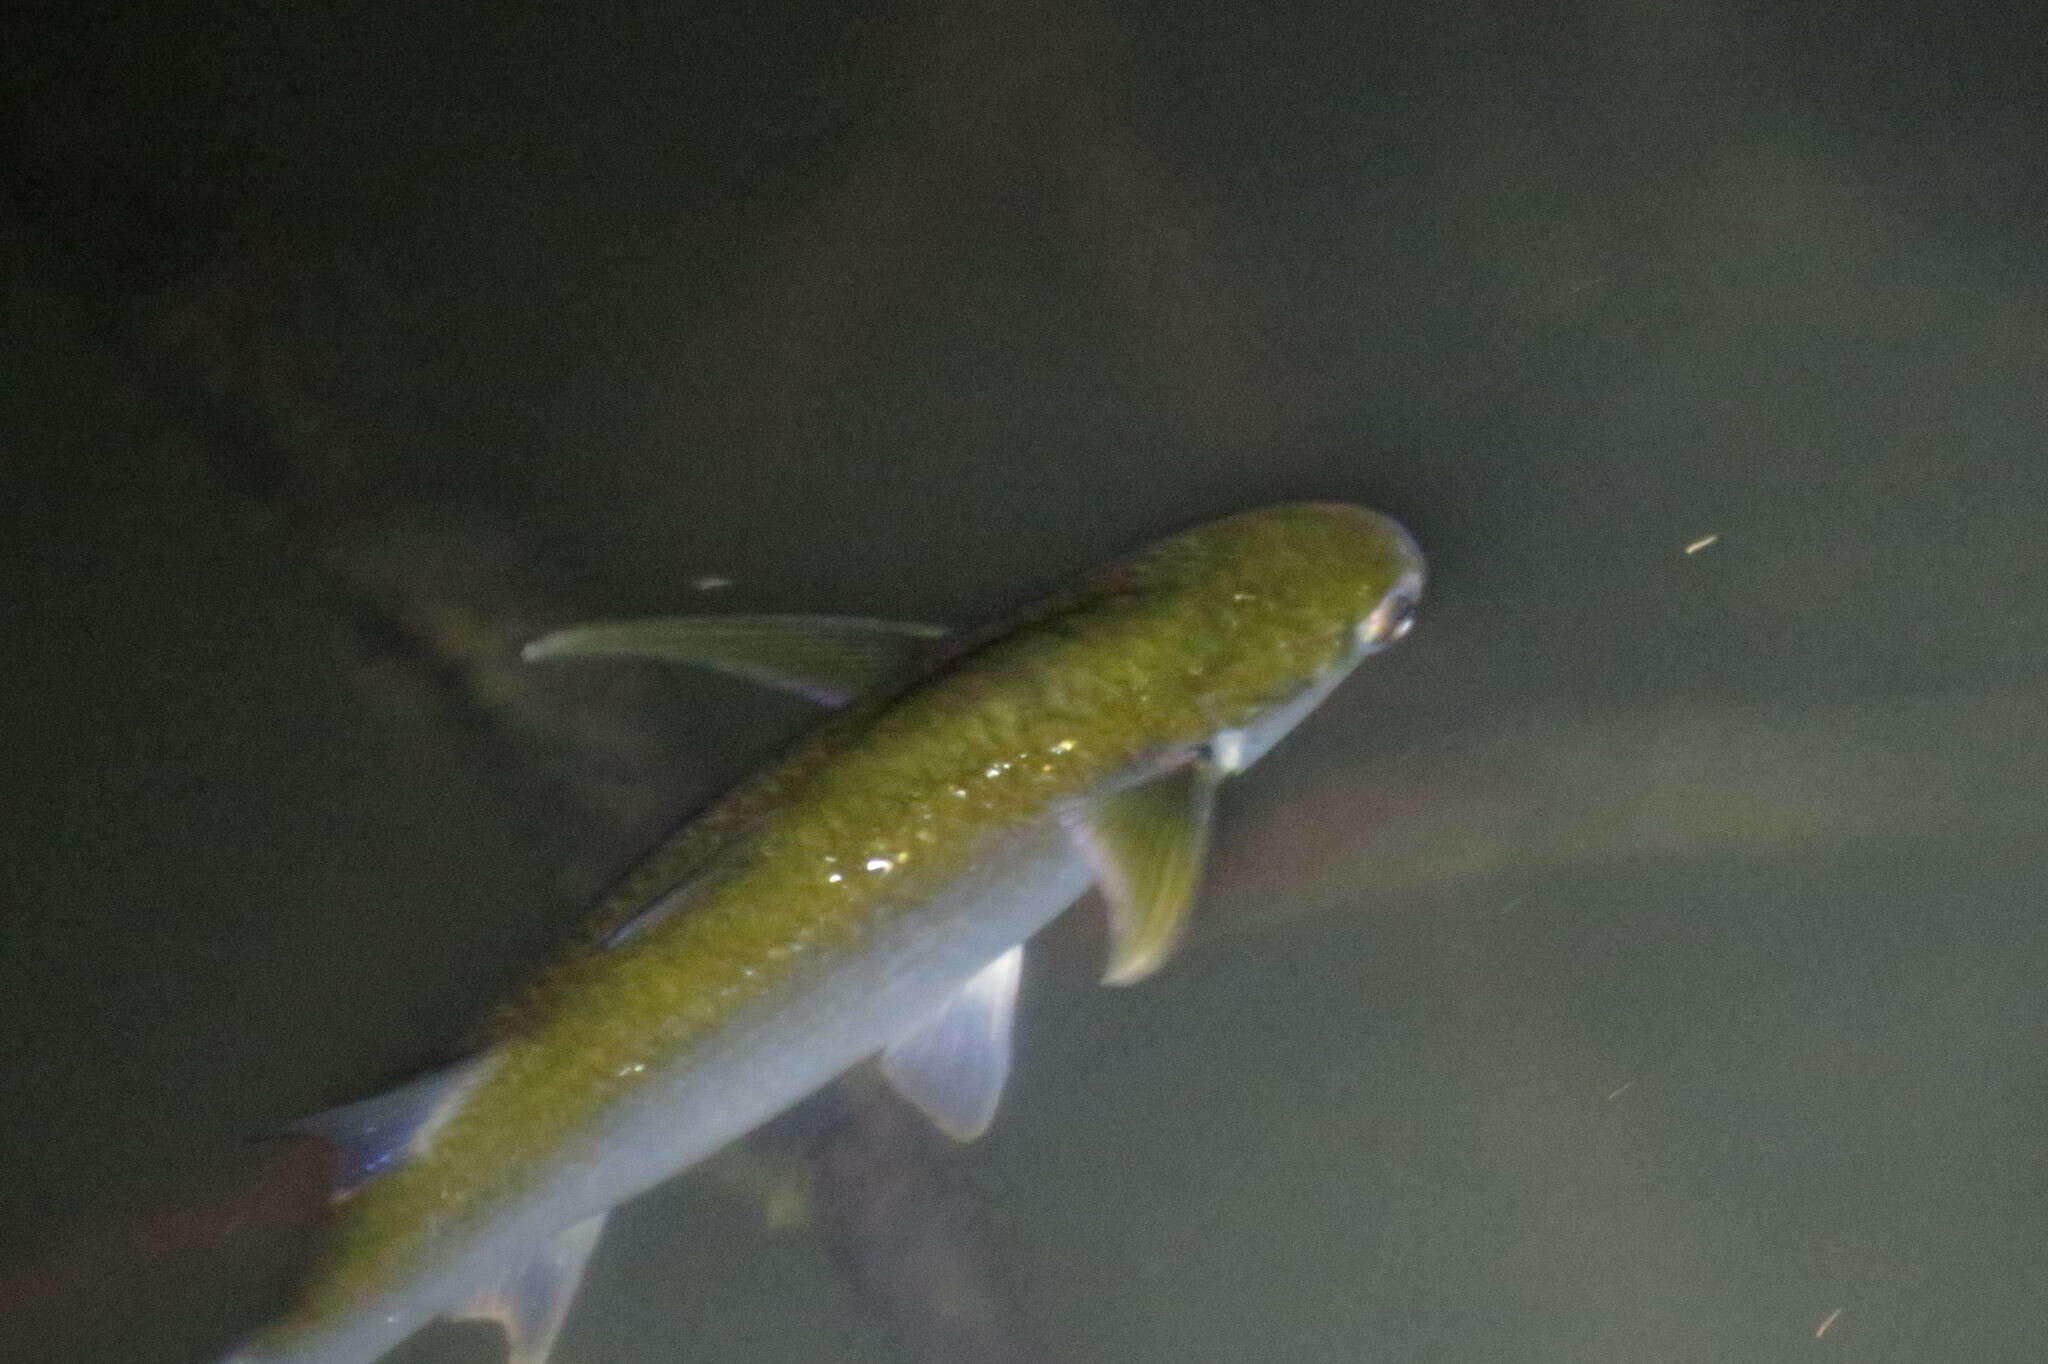 Image of Blue tail mullet